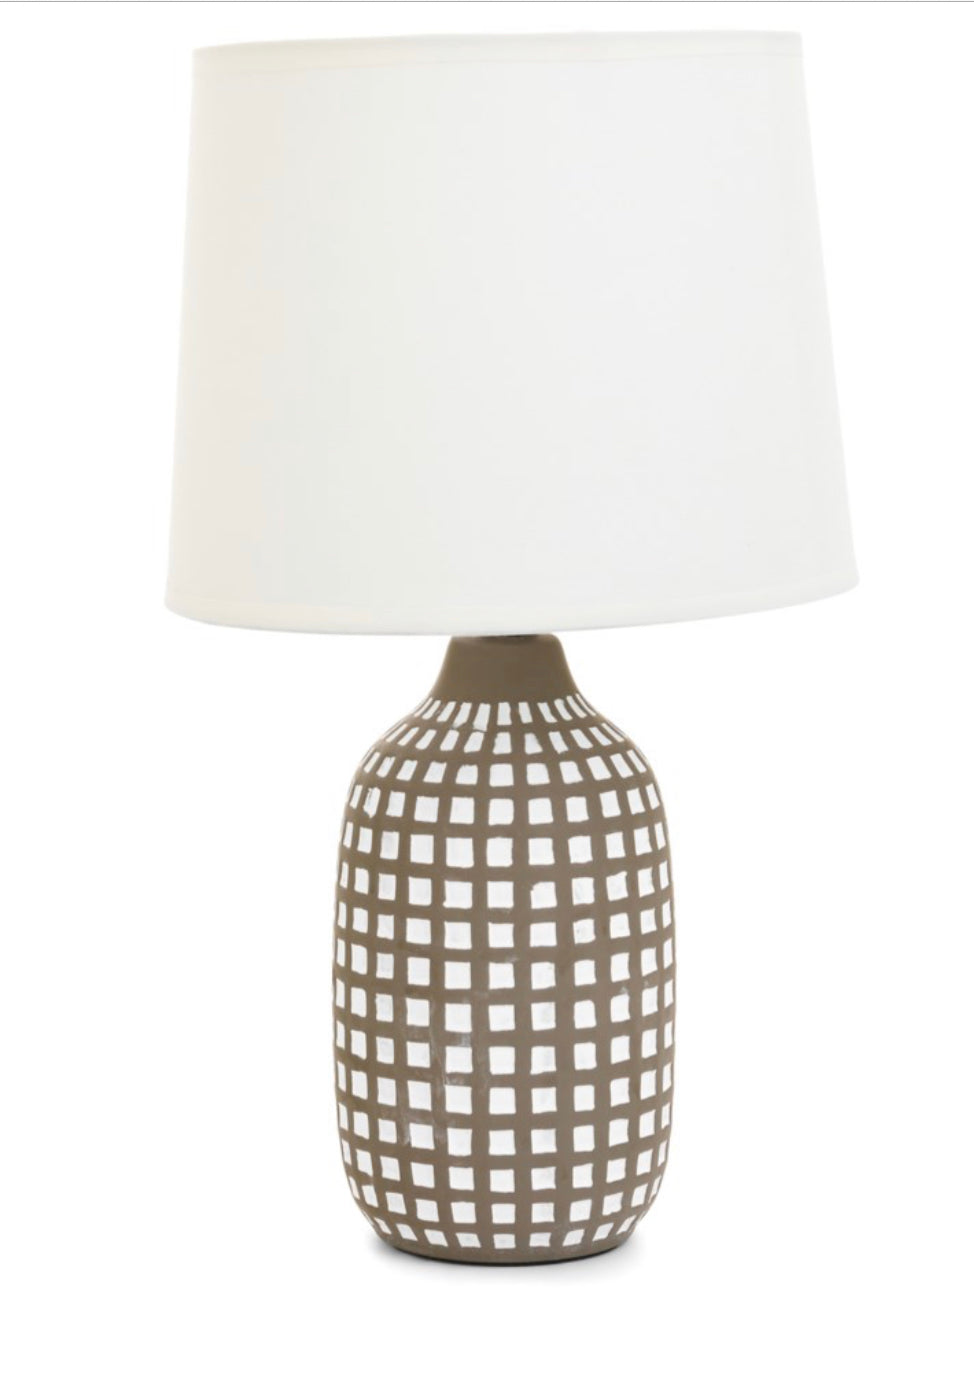 Lampe Salma taupe et blanche